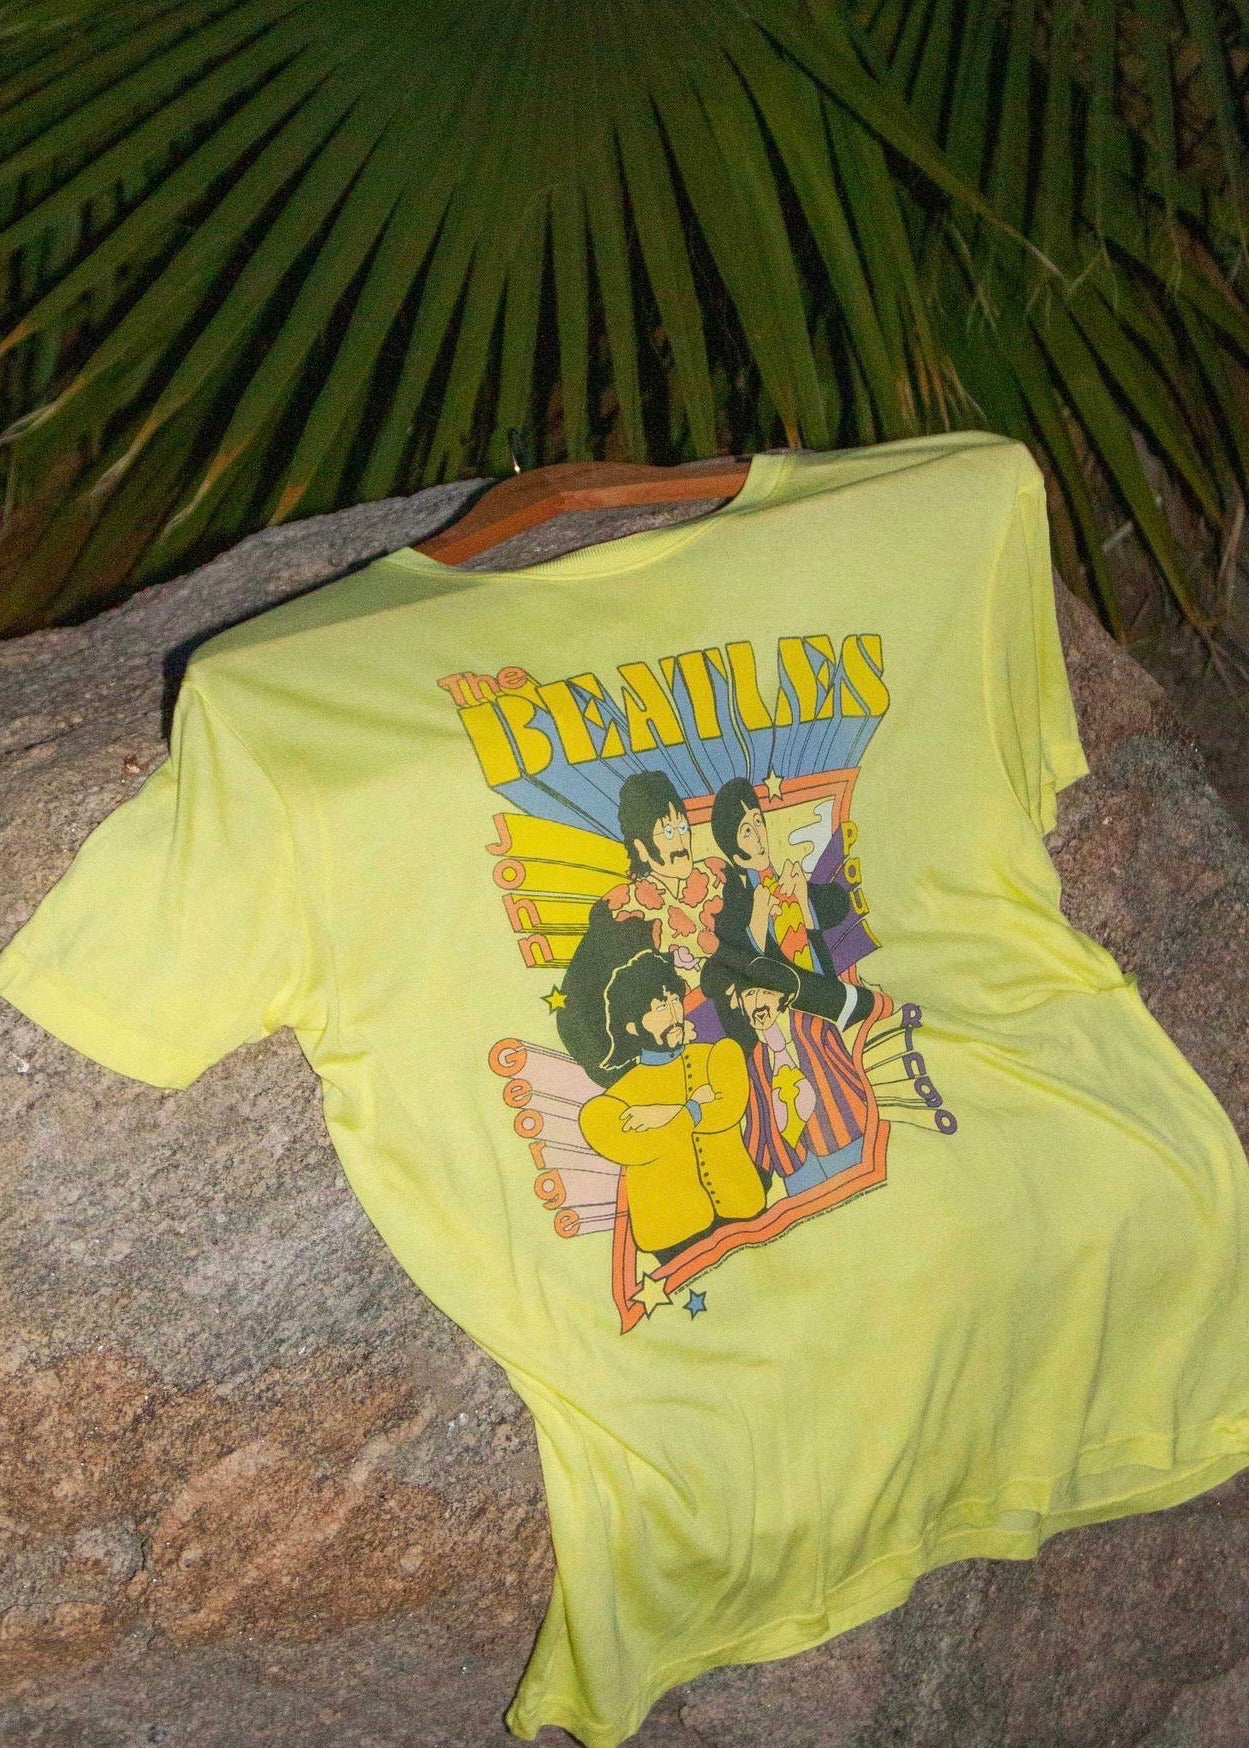 The Beatles Yellow Neon t-shirt by Junk Food Clothing